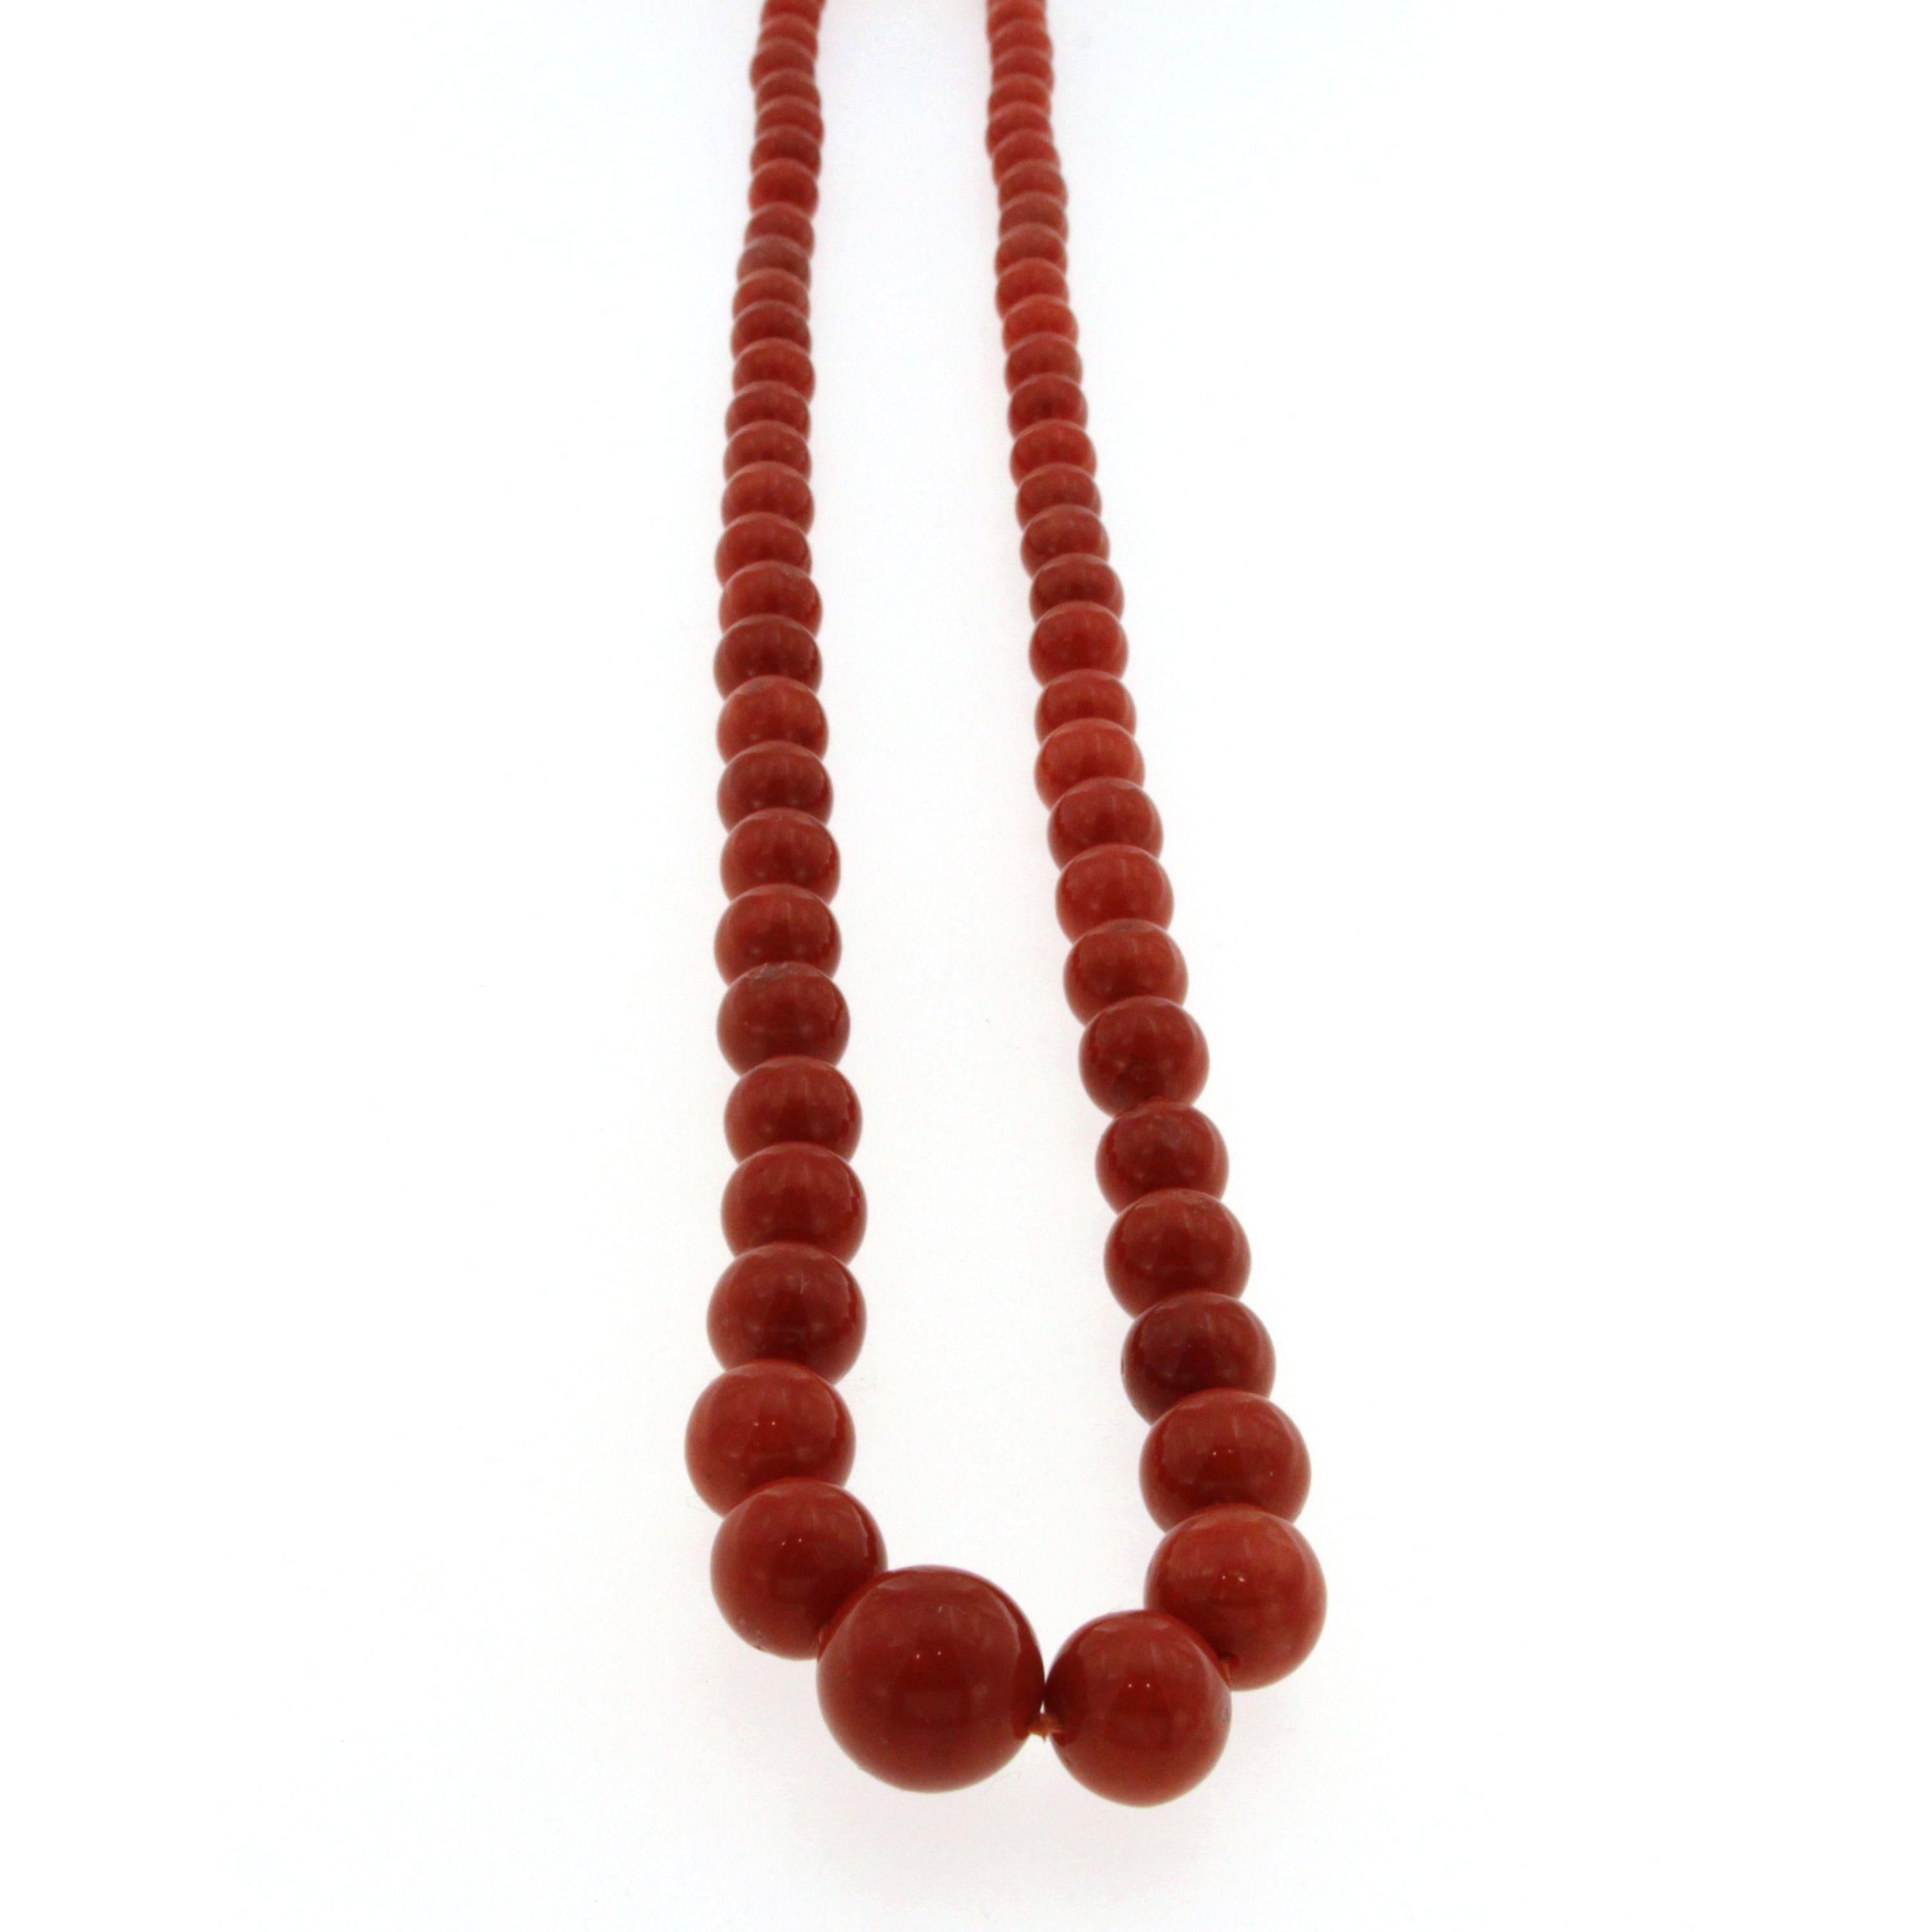 A beautiful necklace strand of fine Mediterranean Coral, Sardinian variety.
This coral is one of the greatest variety, 100% natural not dyed or worked with any resin or other synthetic materials free from any natural blemish. Diameter approx. 12.70